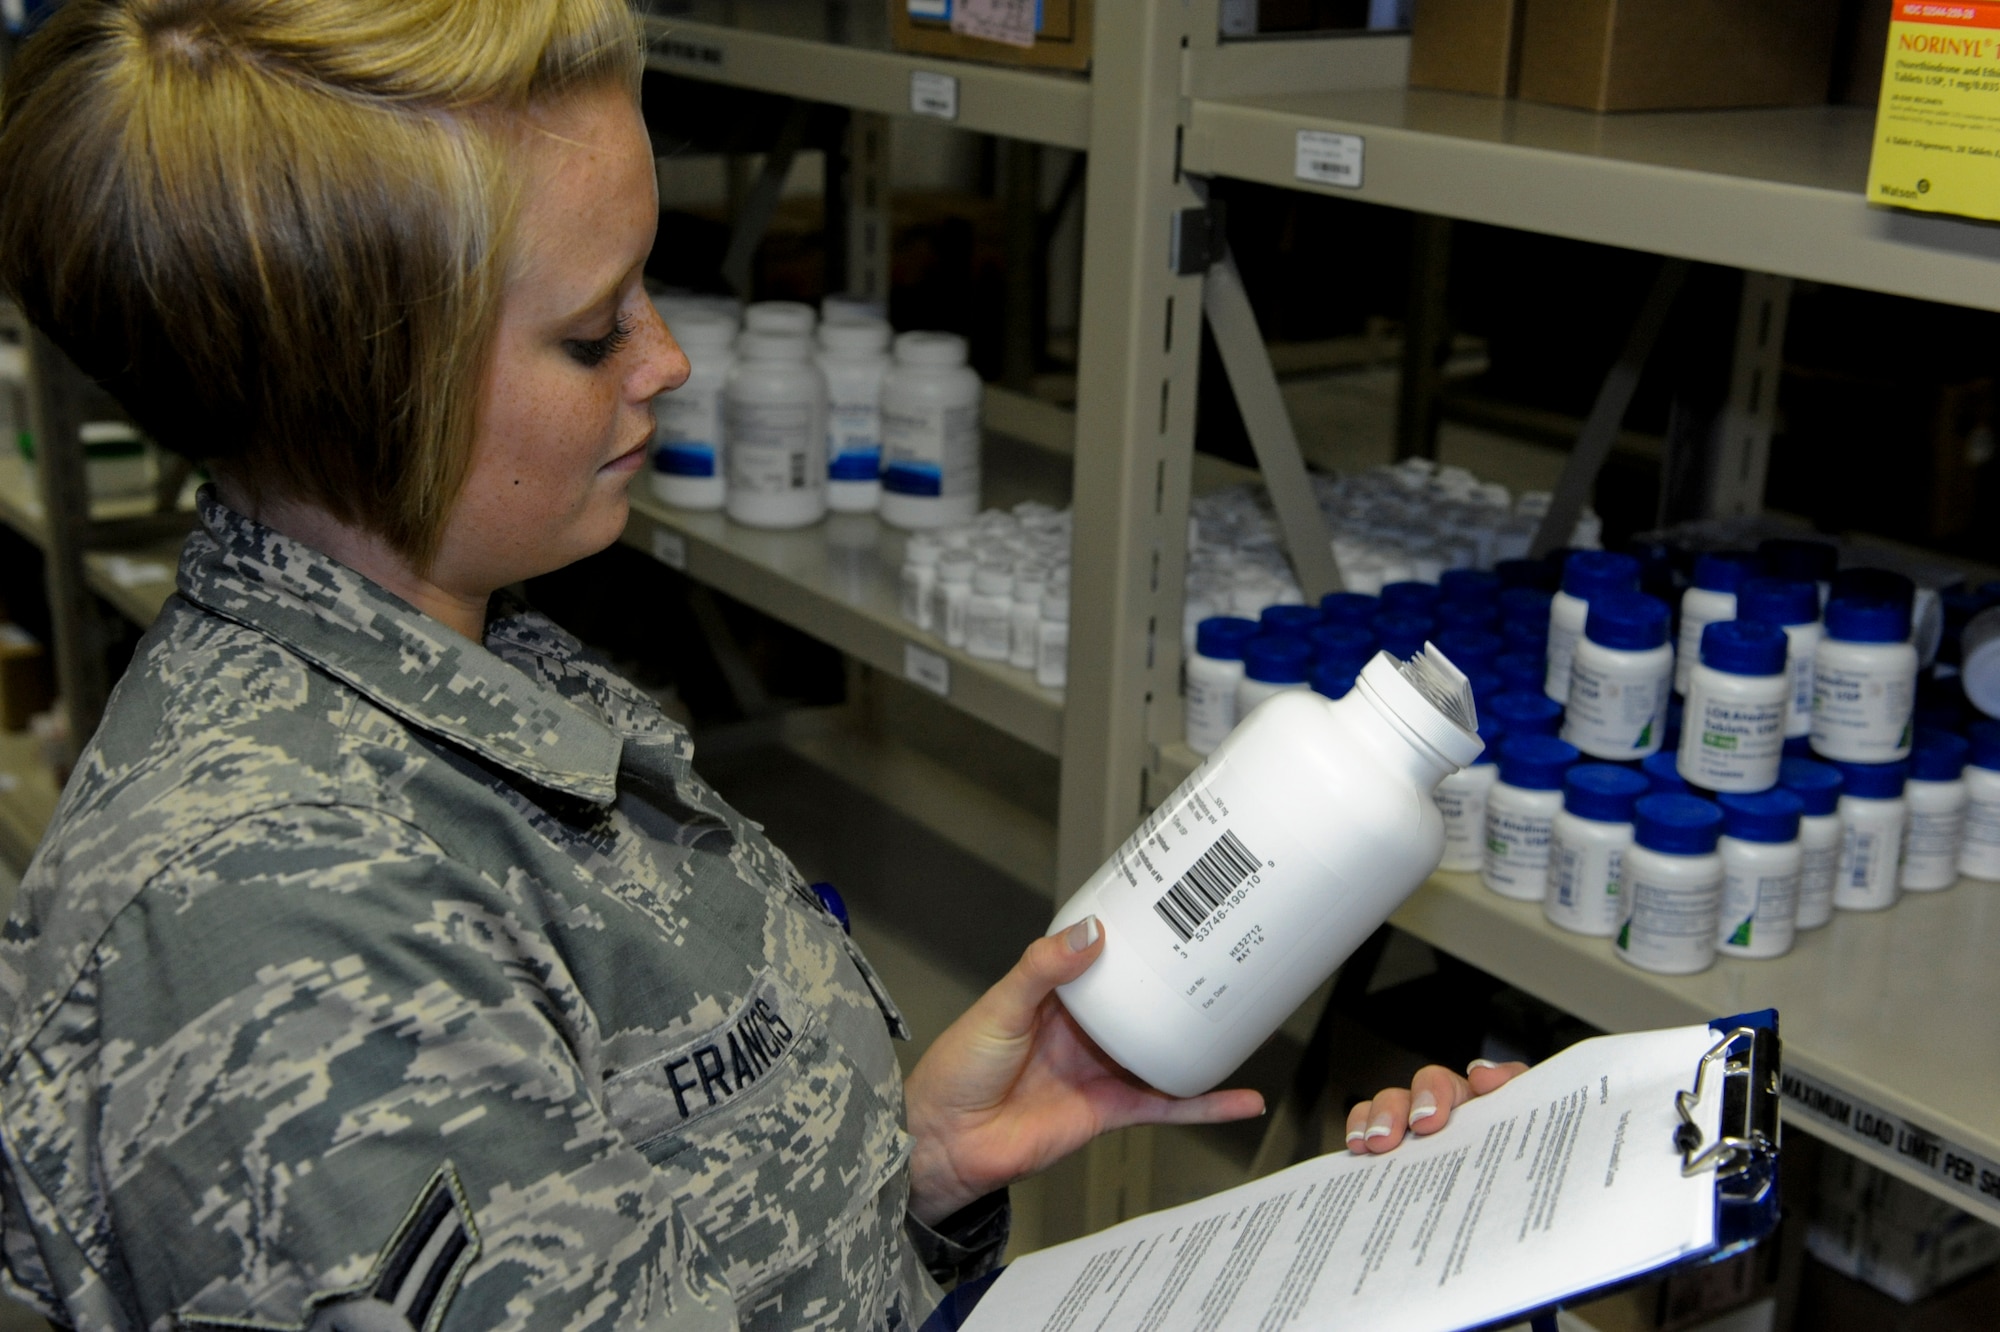 U.S. Air Force Airman 1st Class Chelsea Francis, 18th Medical Group medical materiel apprentice, checks inventory on Kadena Air Base, Japan, Jan. 24, 2013. The medical group holds more than 80 medical and dental care providers who see nearly 600 patients daily. (U.S. Air Force photo/Airman 1st Class Justin Veazie)